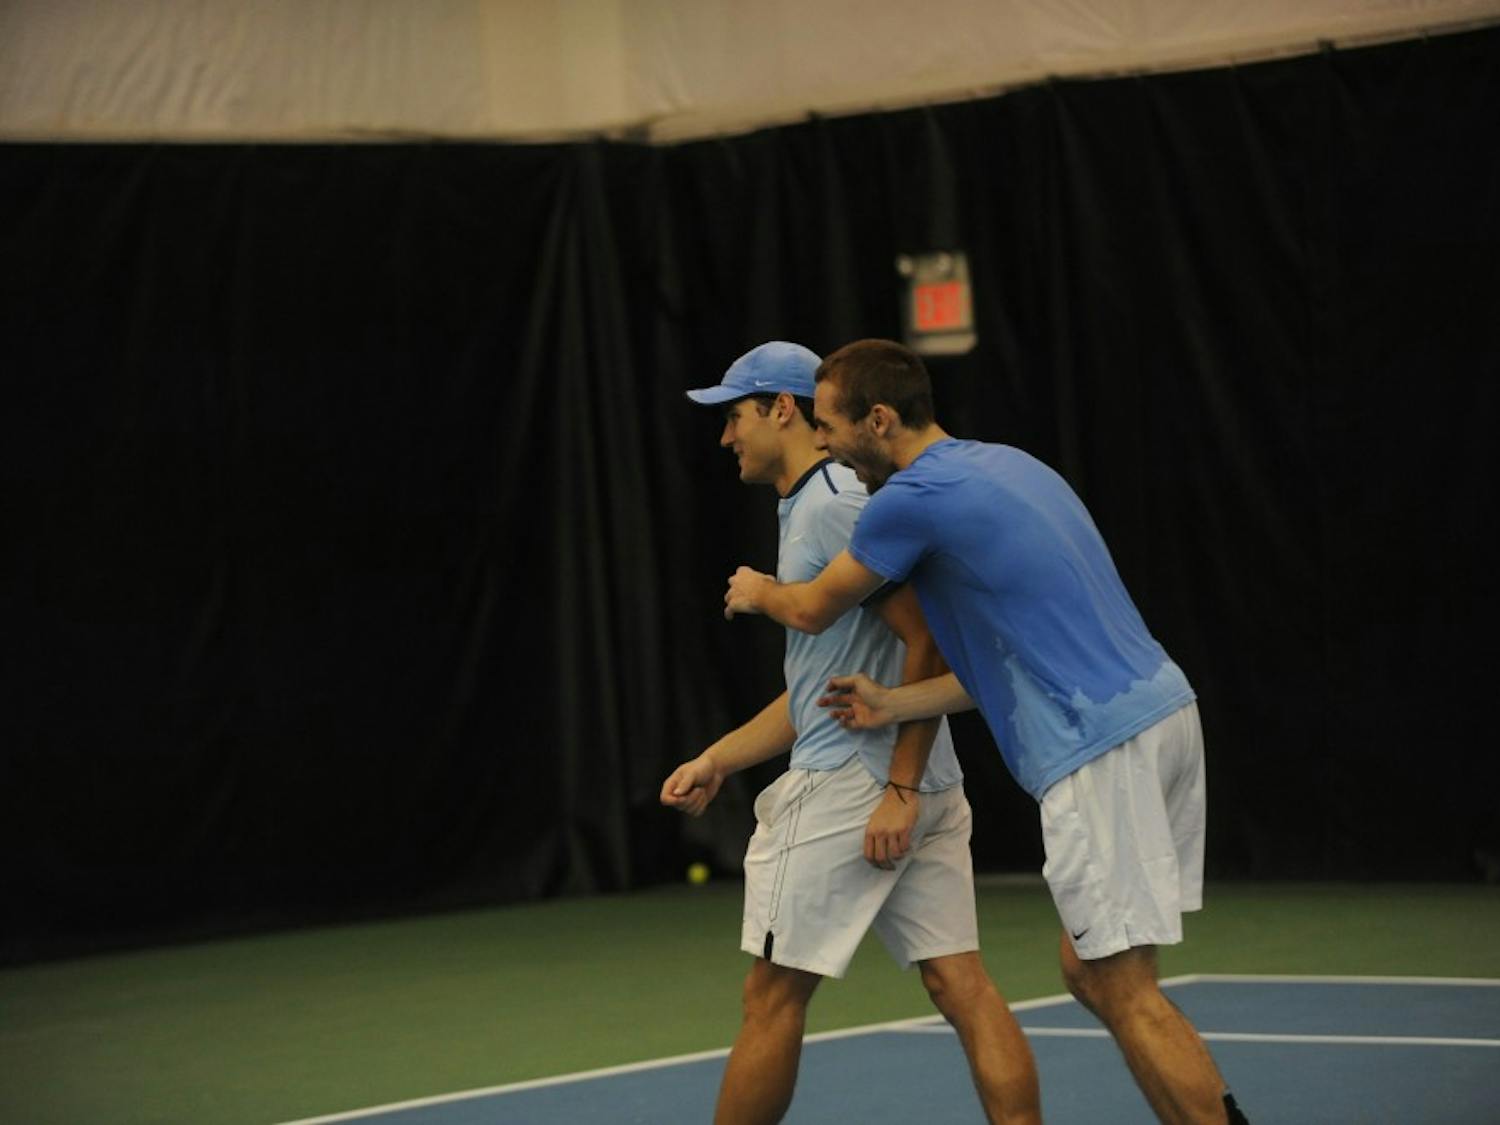 UNC tennis sophomore Benjamin Sigouin congratulates junior Ladd Harrison after competing in and winning in his first collegiate tennis match against Bucknell University on Saturday, Jan. 19. 2019. 